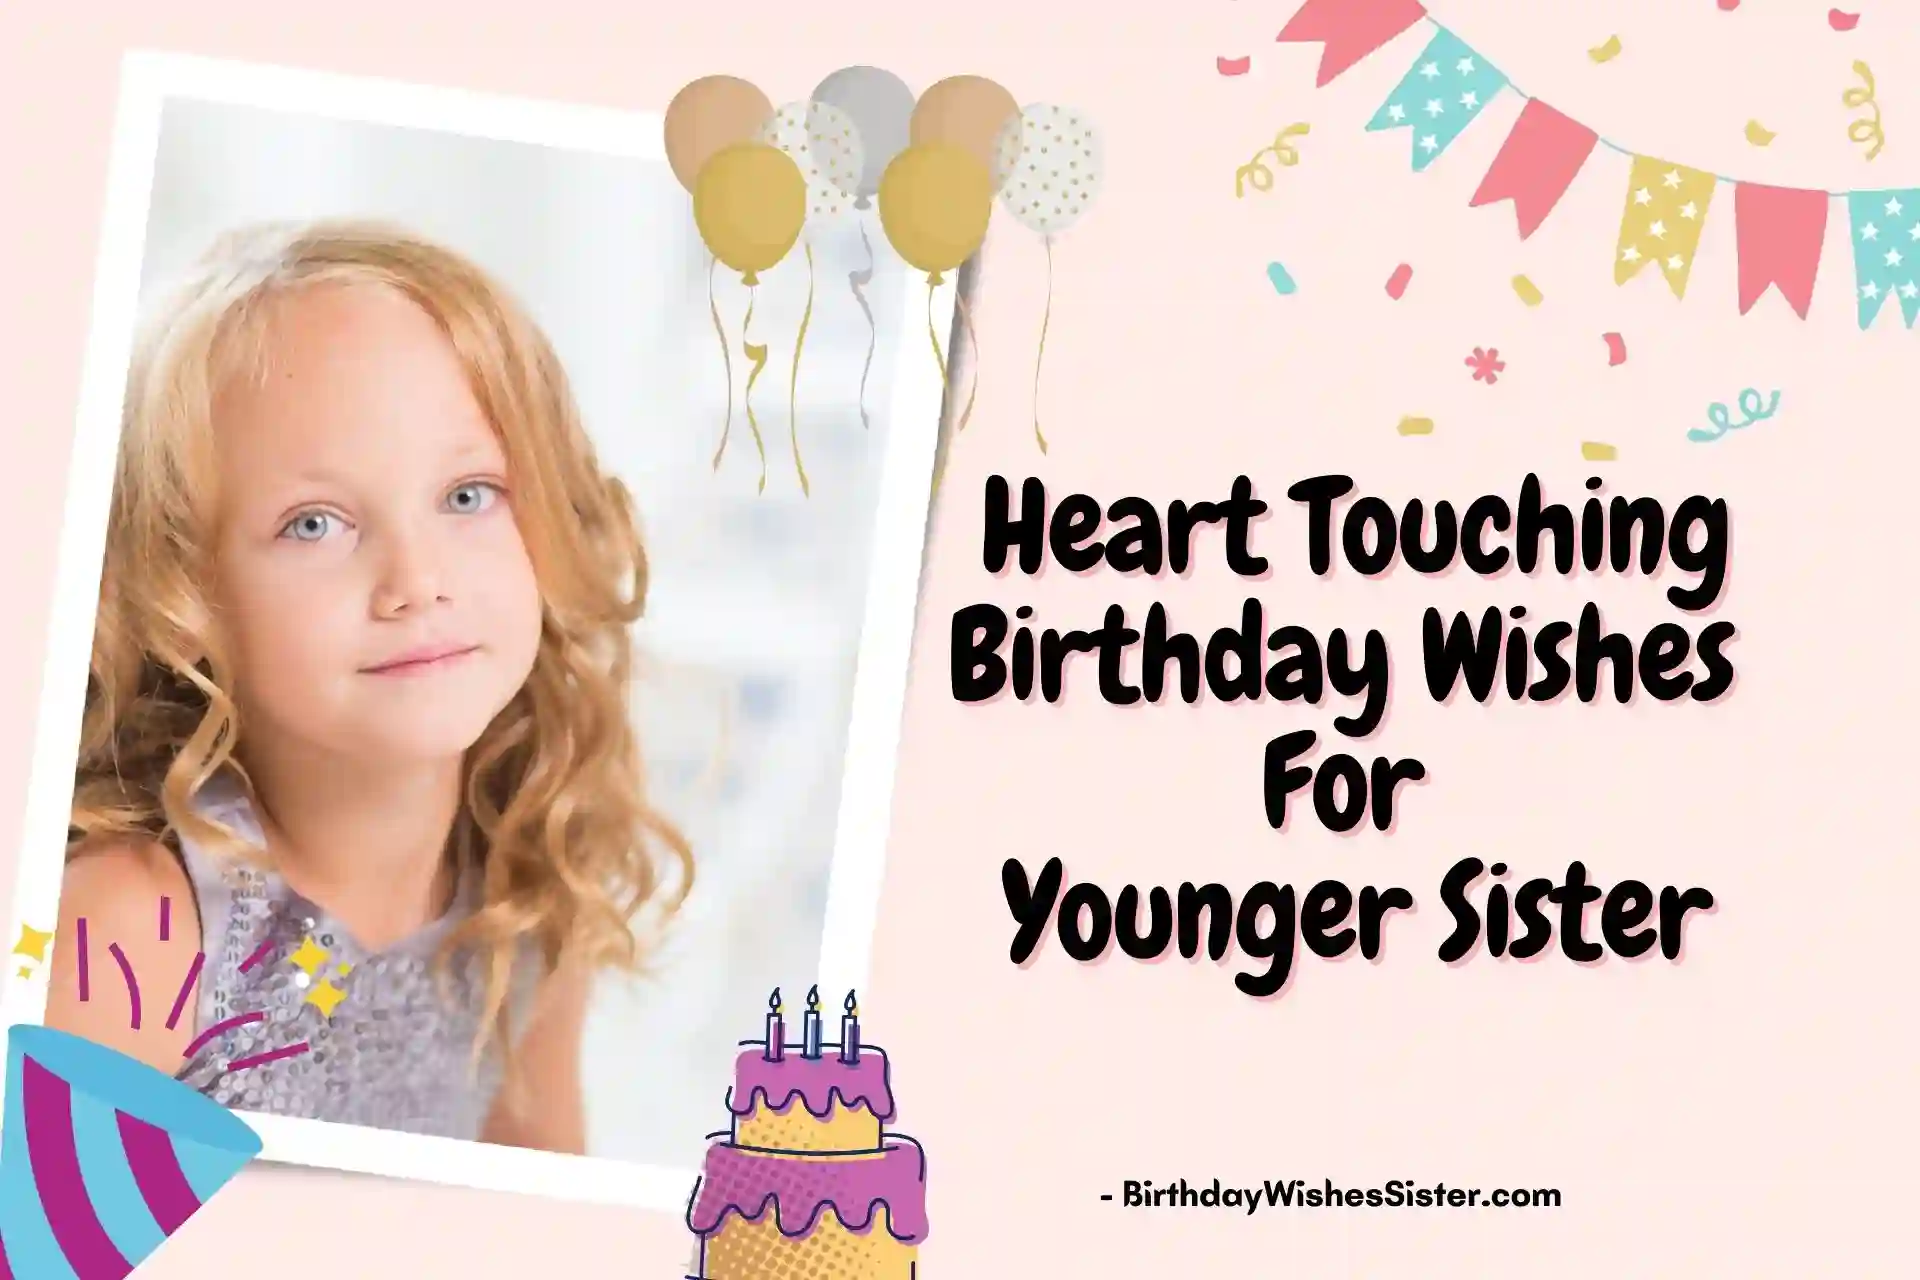 Heart Touching Birthday Wishes For Younger Sister